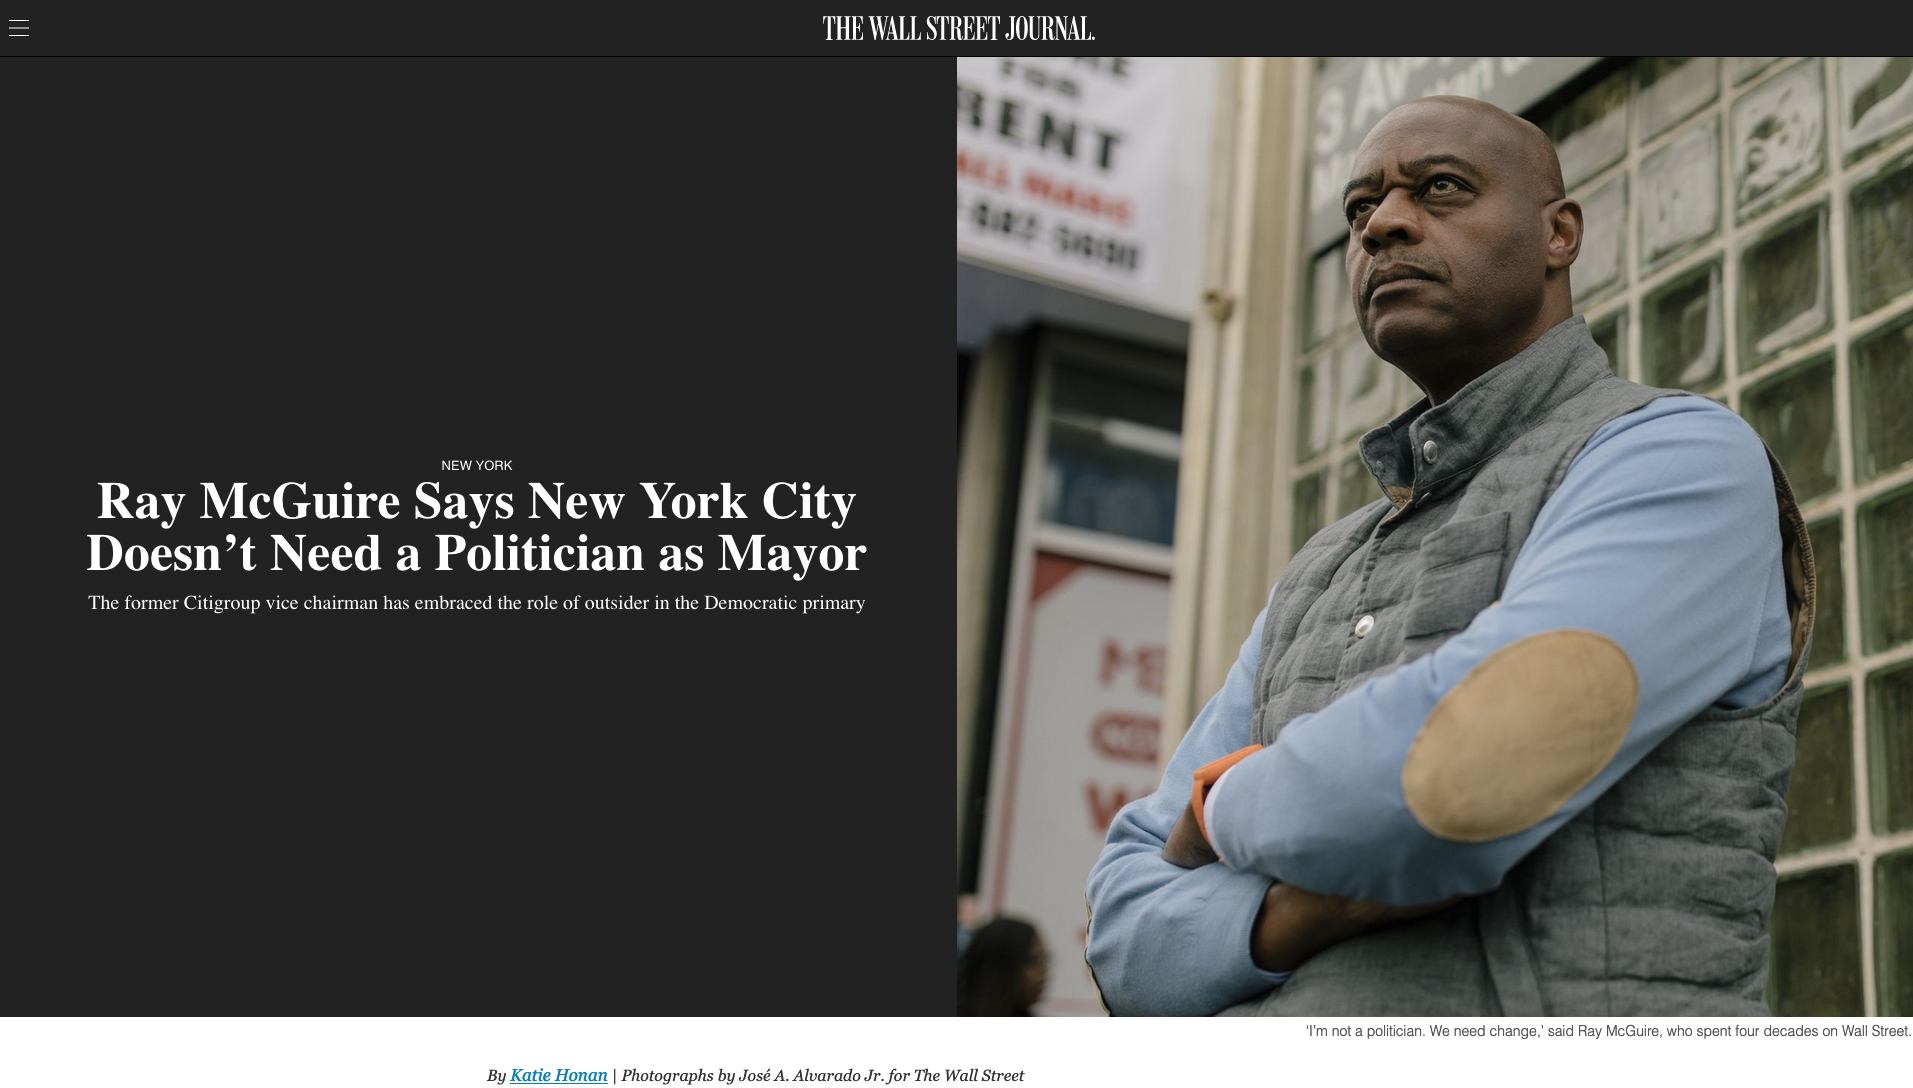 for The Wall Street Journal: Ray McGuire Says New York City Doesn't Need a Politician as Mayor